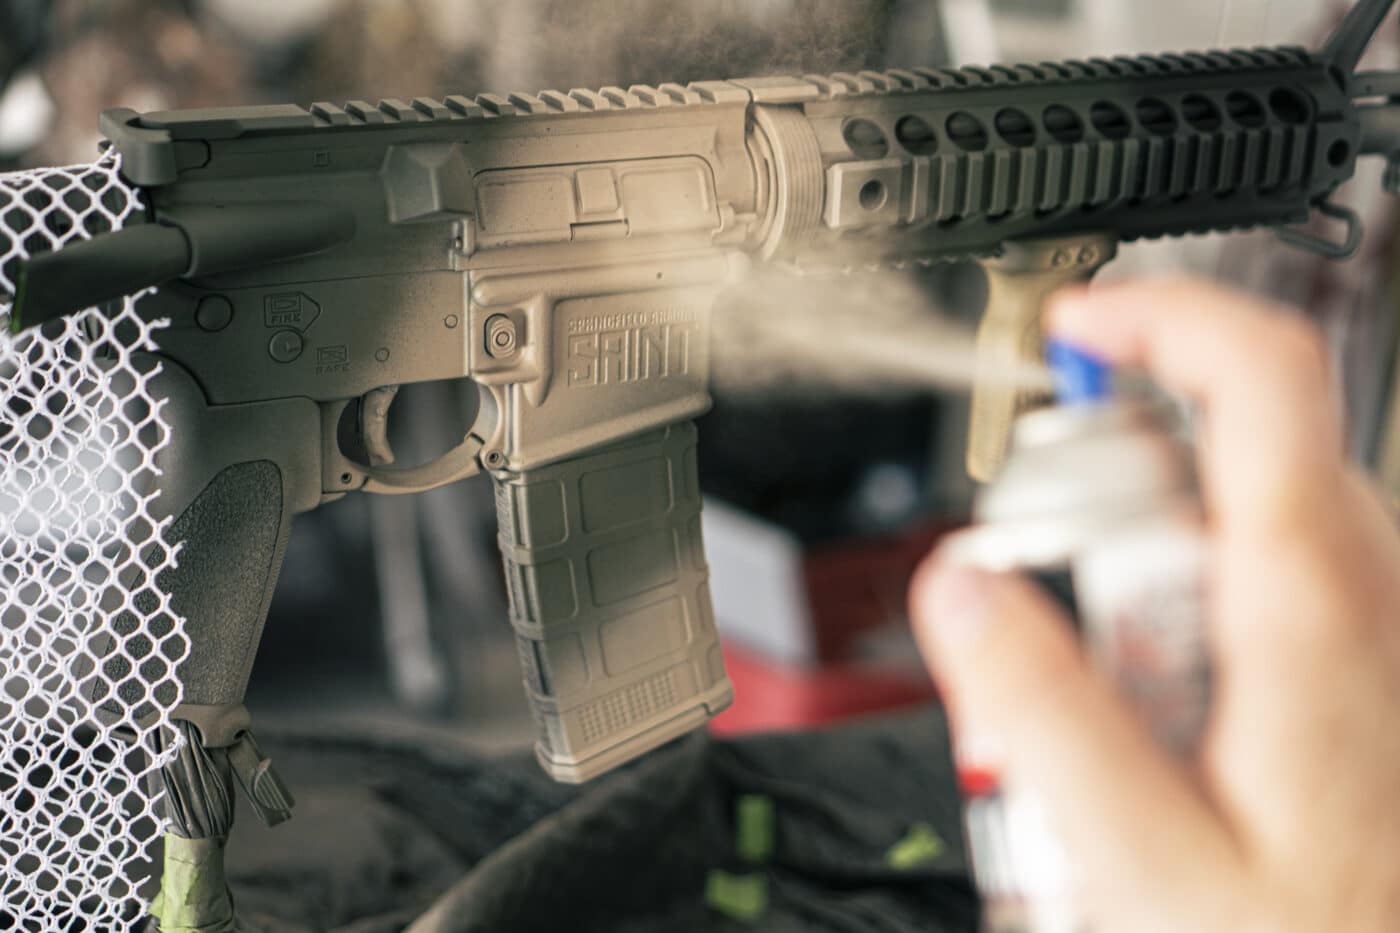 Applying spray paint to a rifle